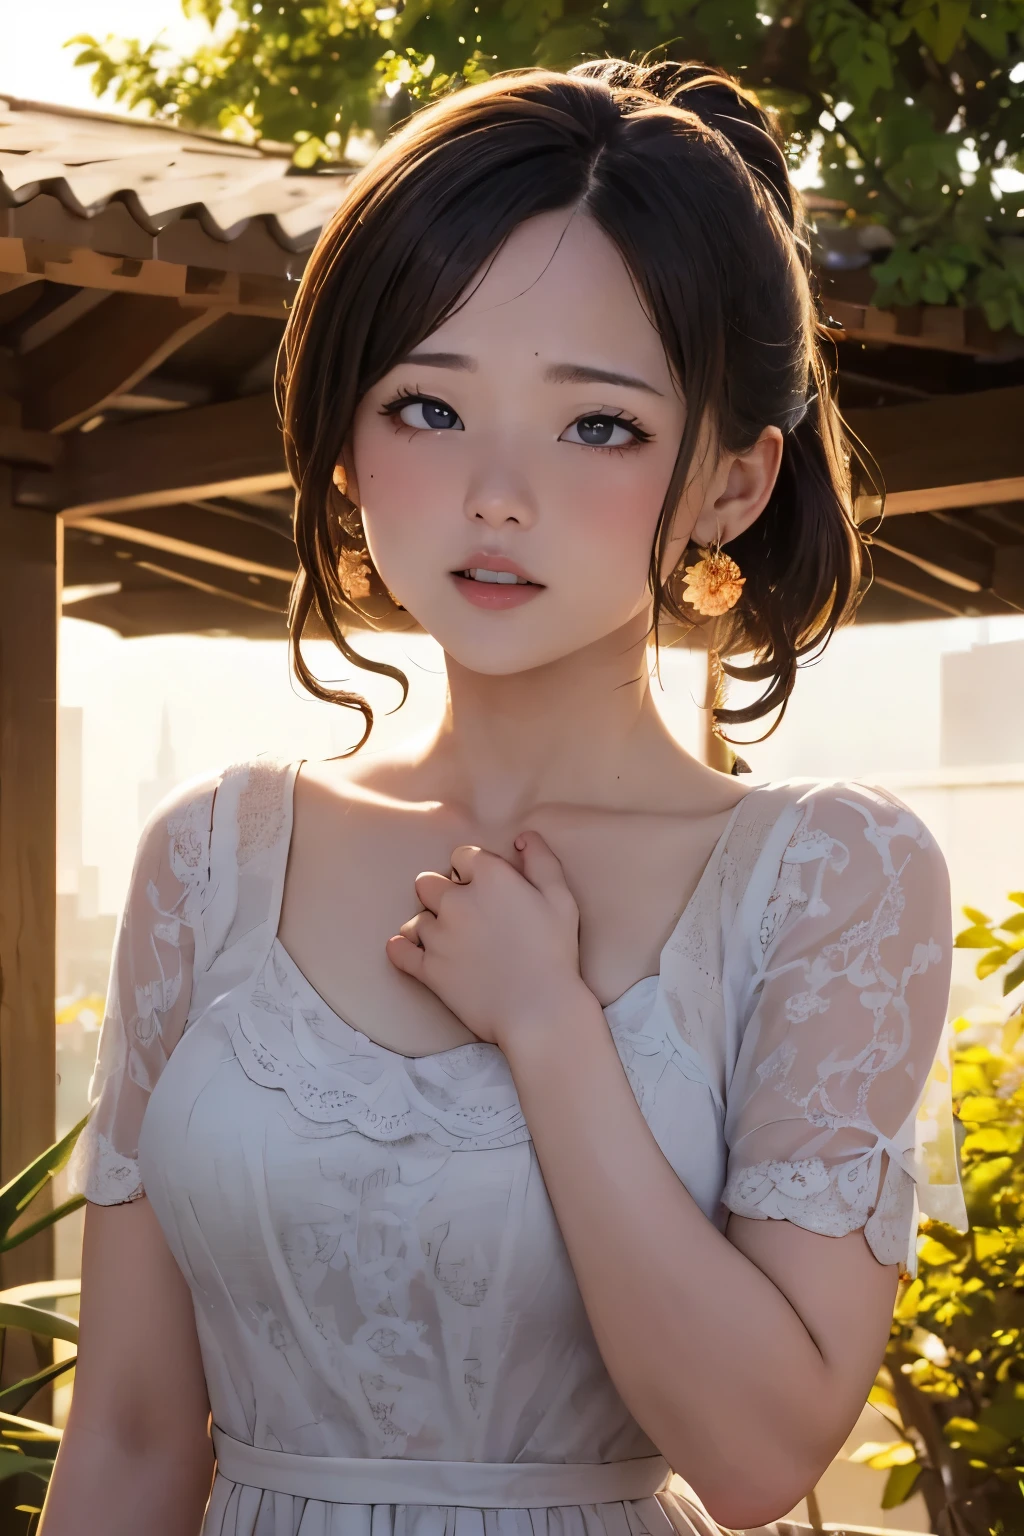 high-definition image, (((round face))), eyes realistic sizing, realistic skin, drooping eyes, smiling, ecstasy face, ((various patterned feminine casual long dress)), (strong sunlight, old fashion), skyscrapers, hair up, tiny earrings, ((touching chest)),